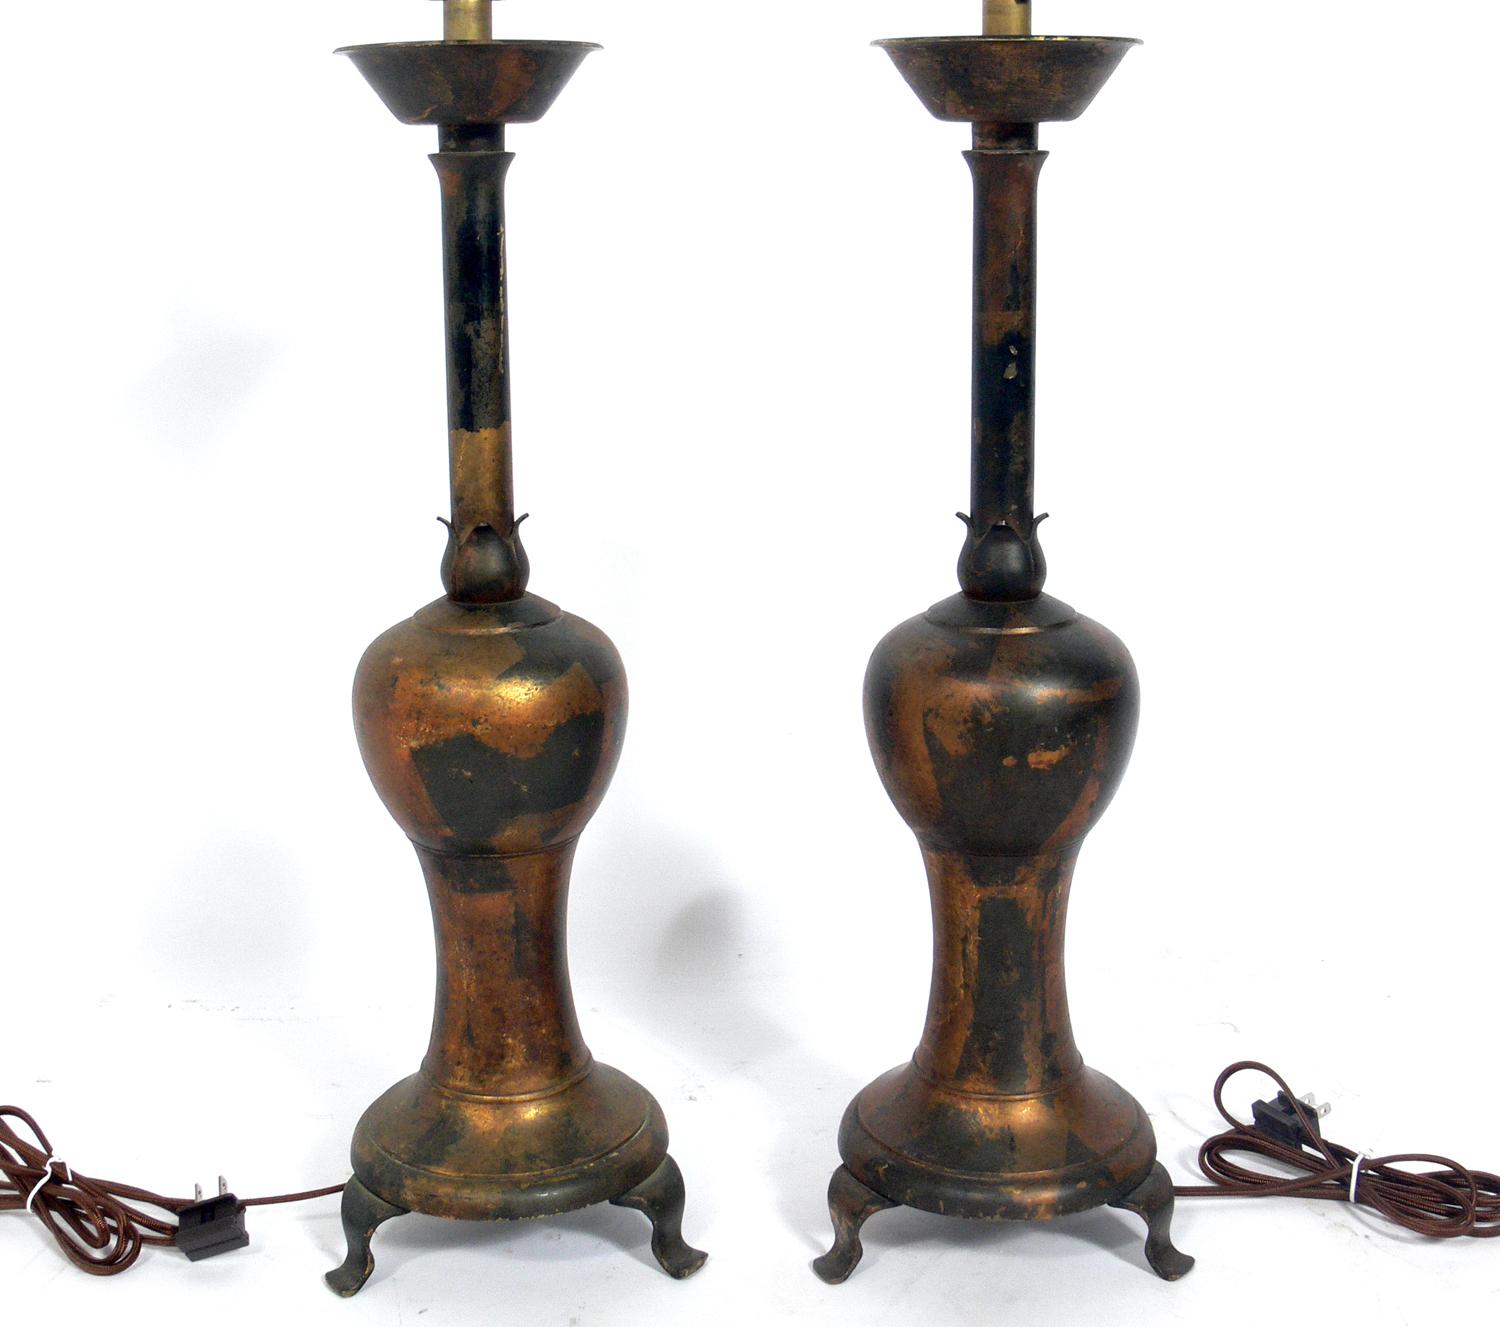 Pair of distressed gilt metal Asian lamps, probably Chinese, circa 1950s, possibly earlier. They have been rewired and are ready to use. The price noted below includes the shades.